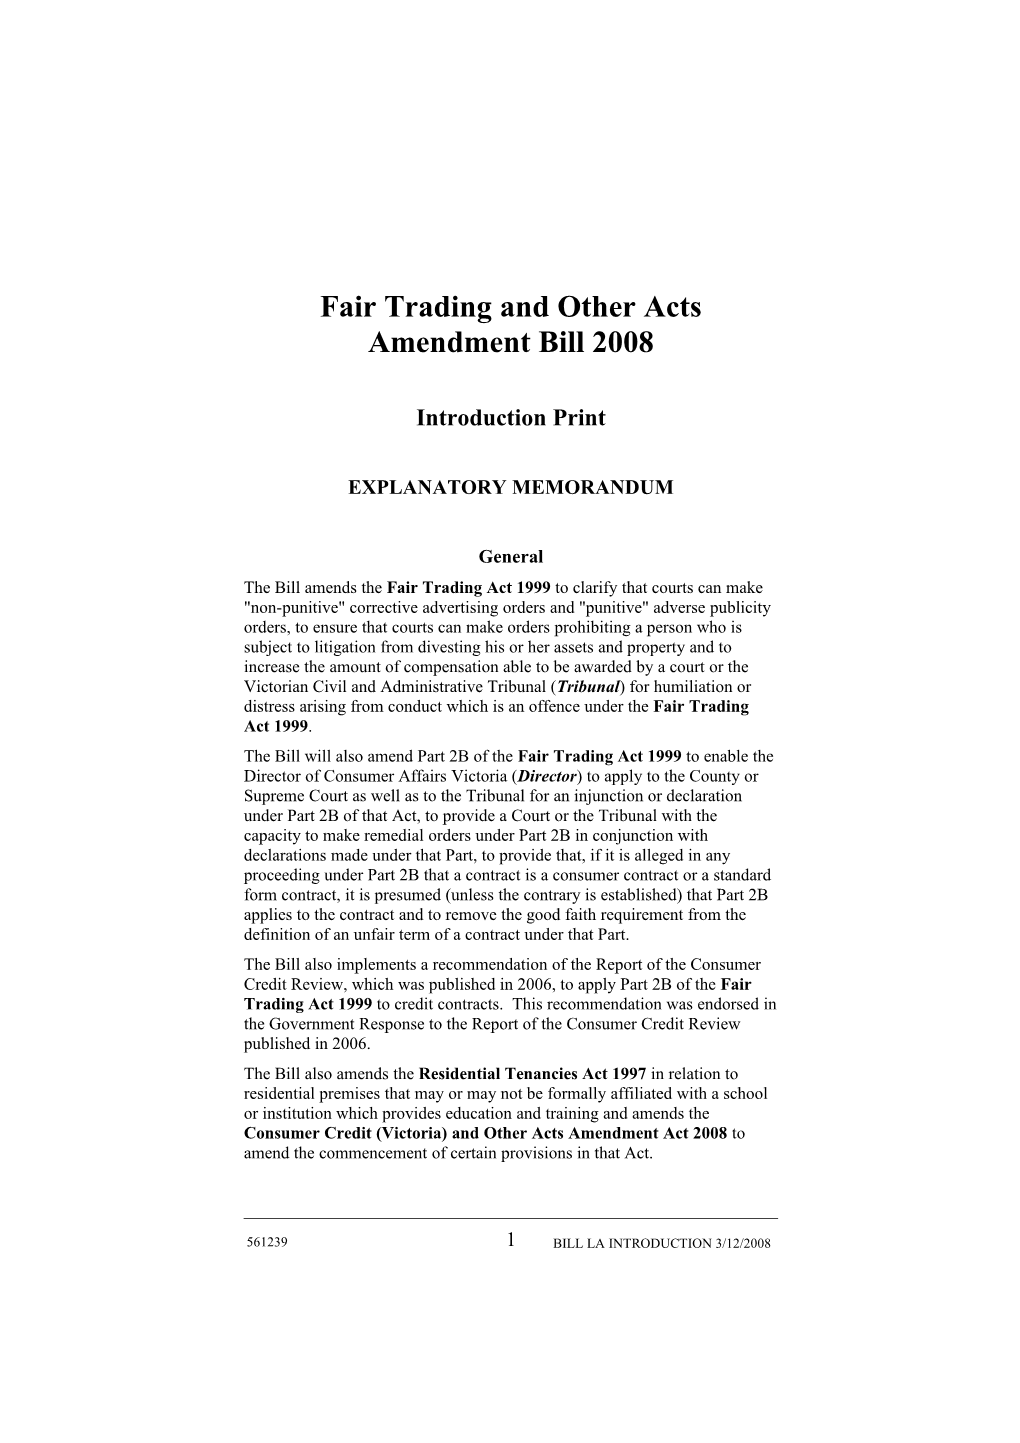 Fair Trading and Other Acts Amendment Bill 2008